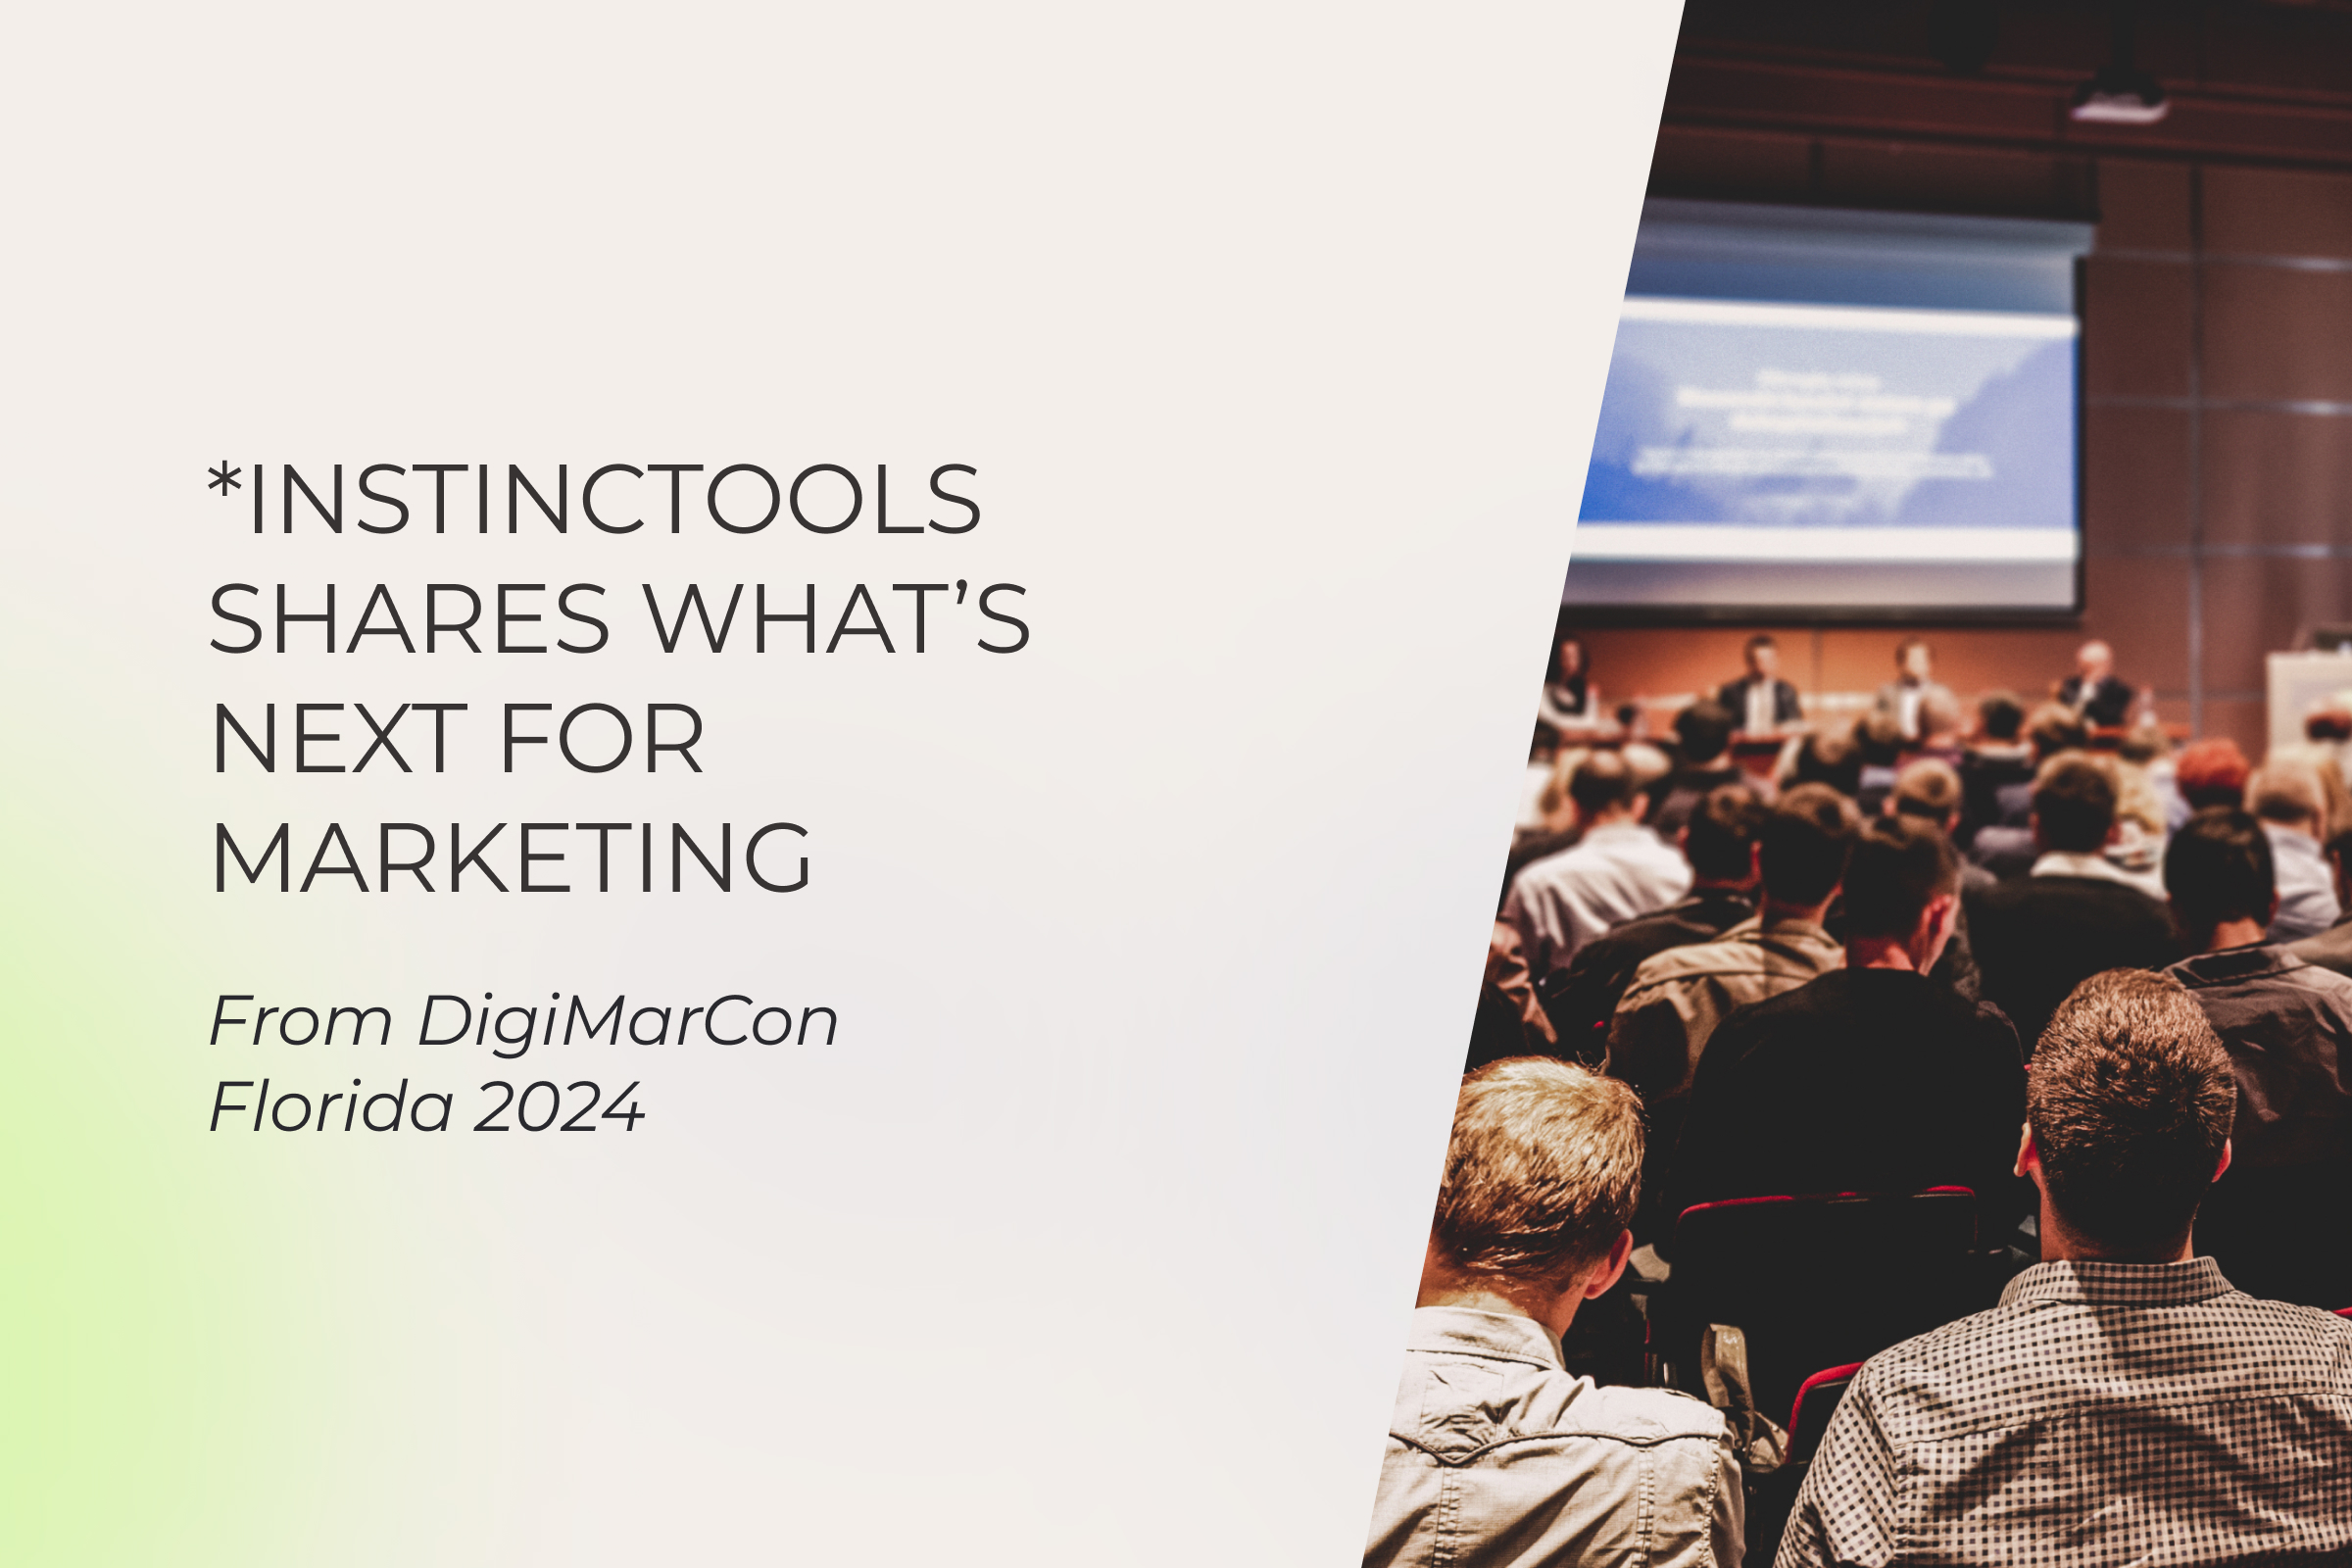 Instinctools Shares What’s Next for Marketing From DigiMarCon Florida 2024